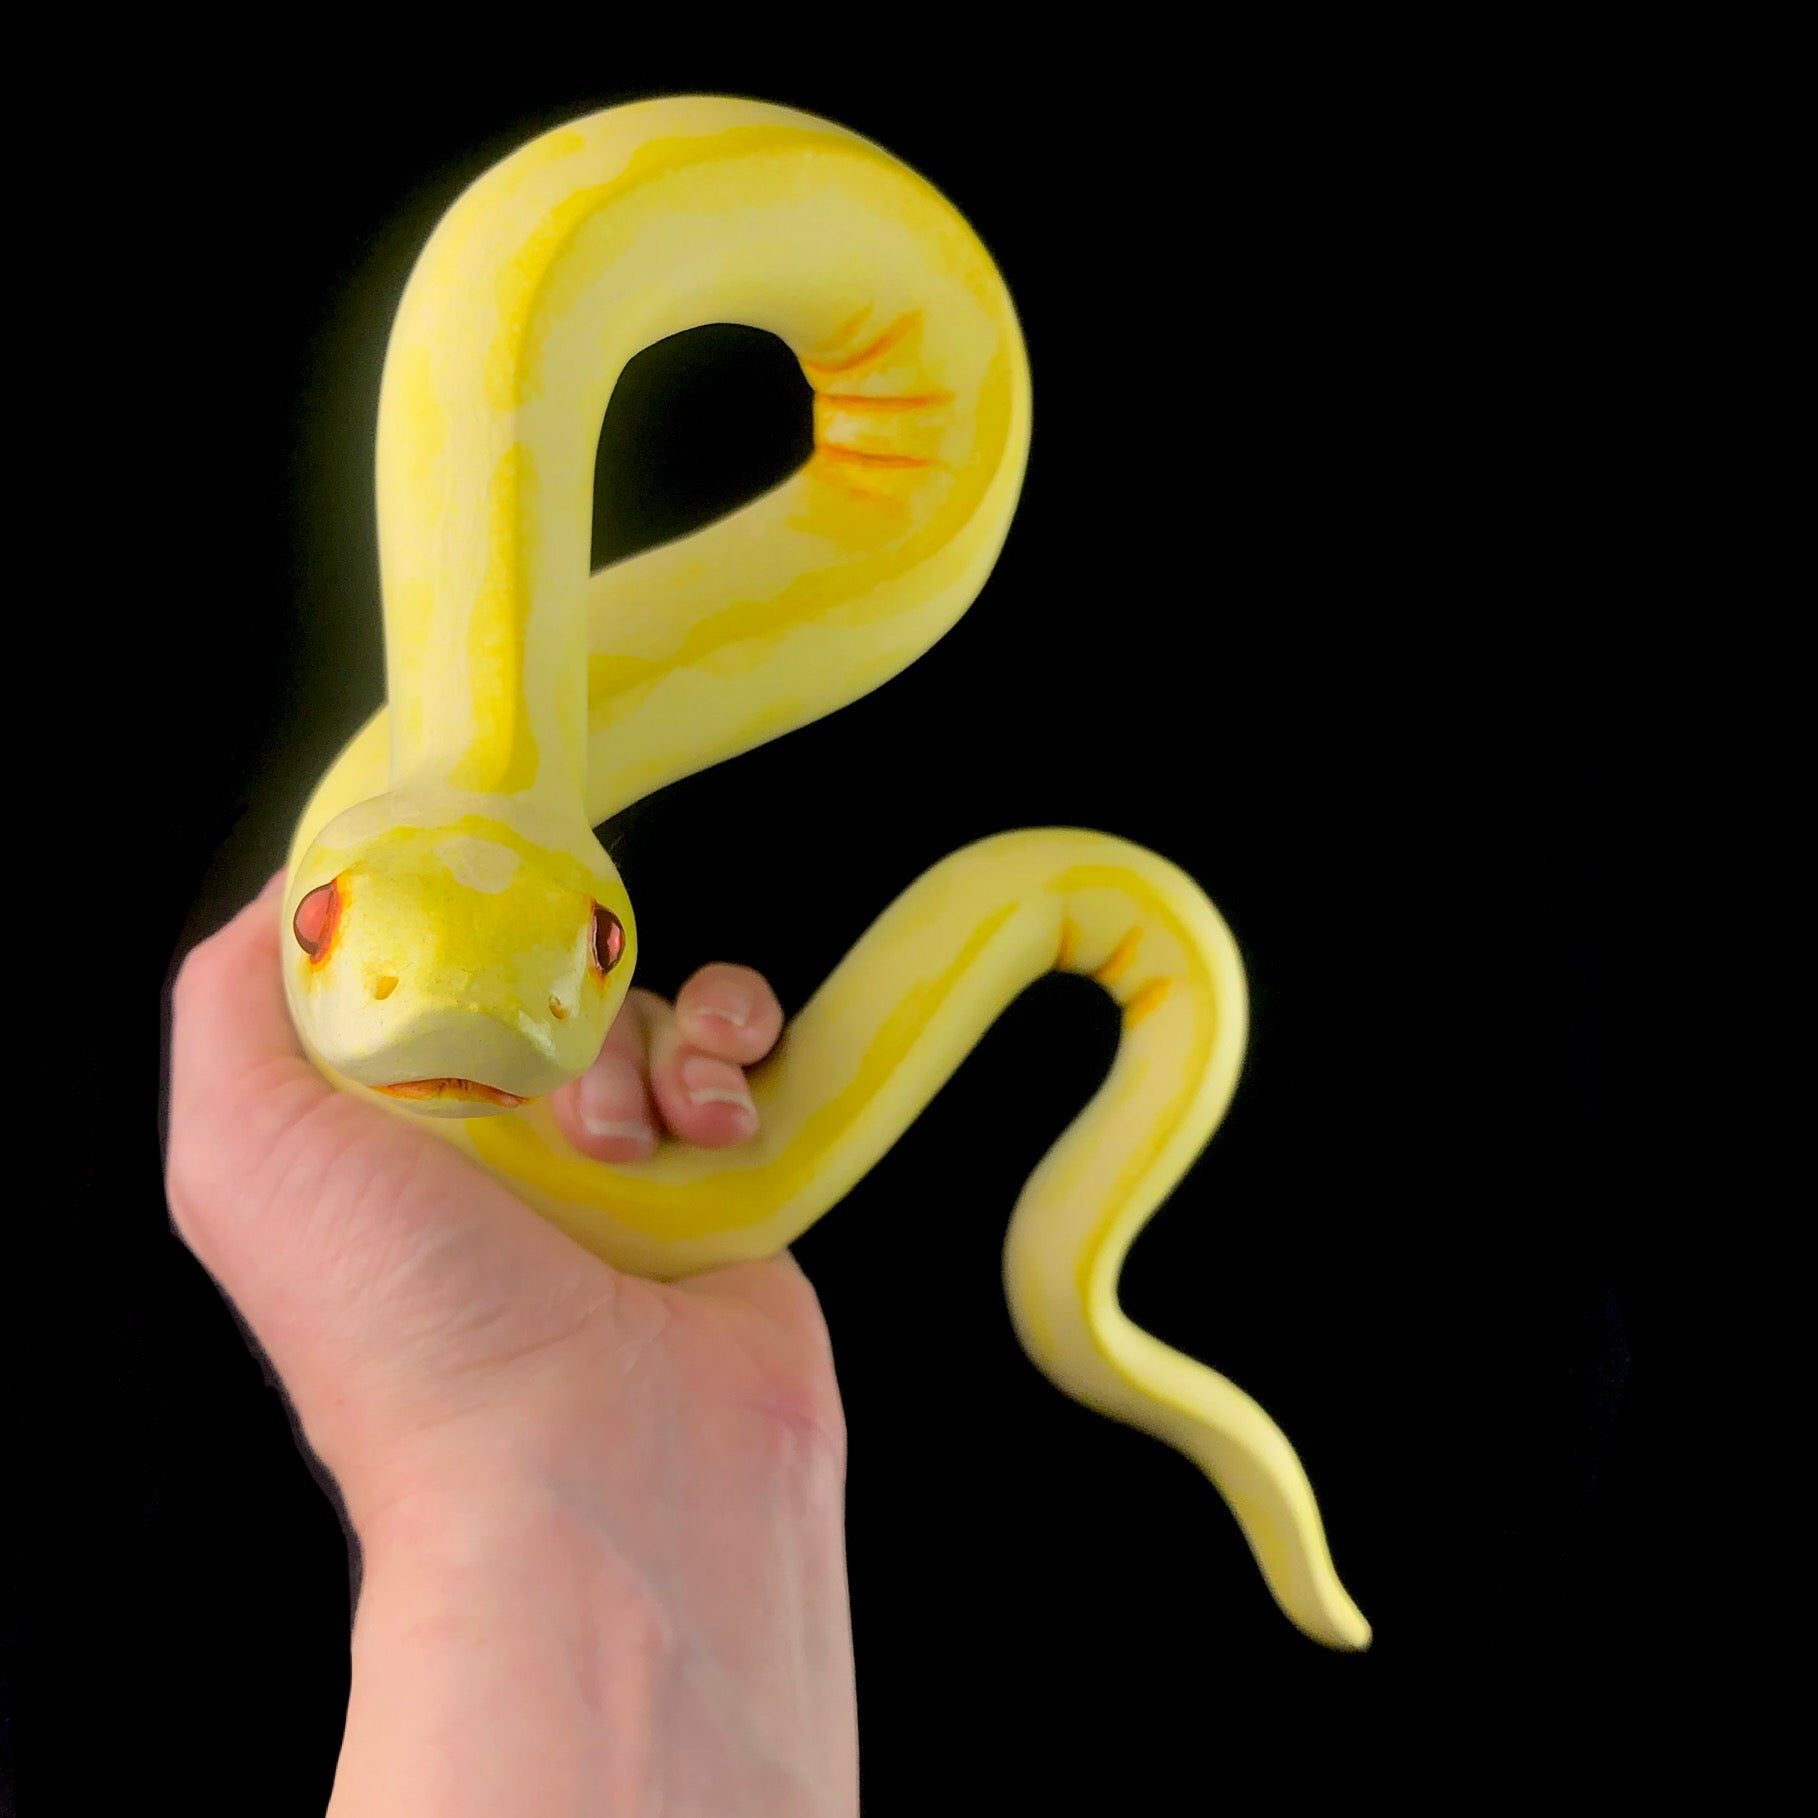 Yellow Wall Hanging Snake Sculpture in hand for size reference